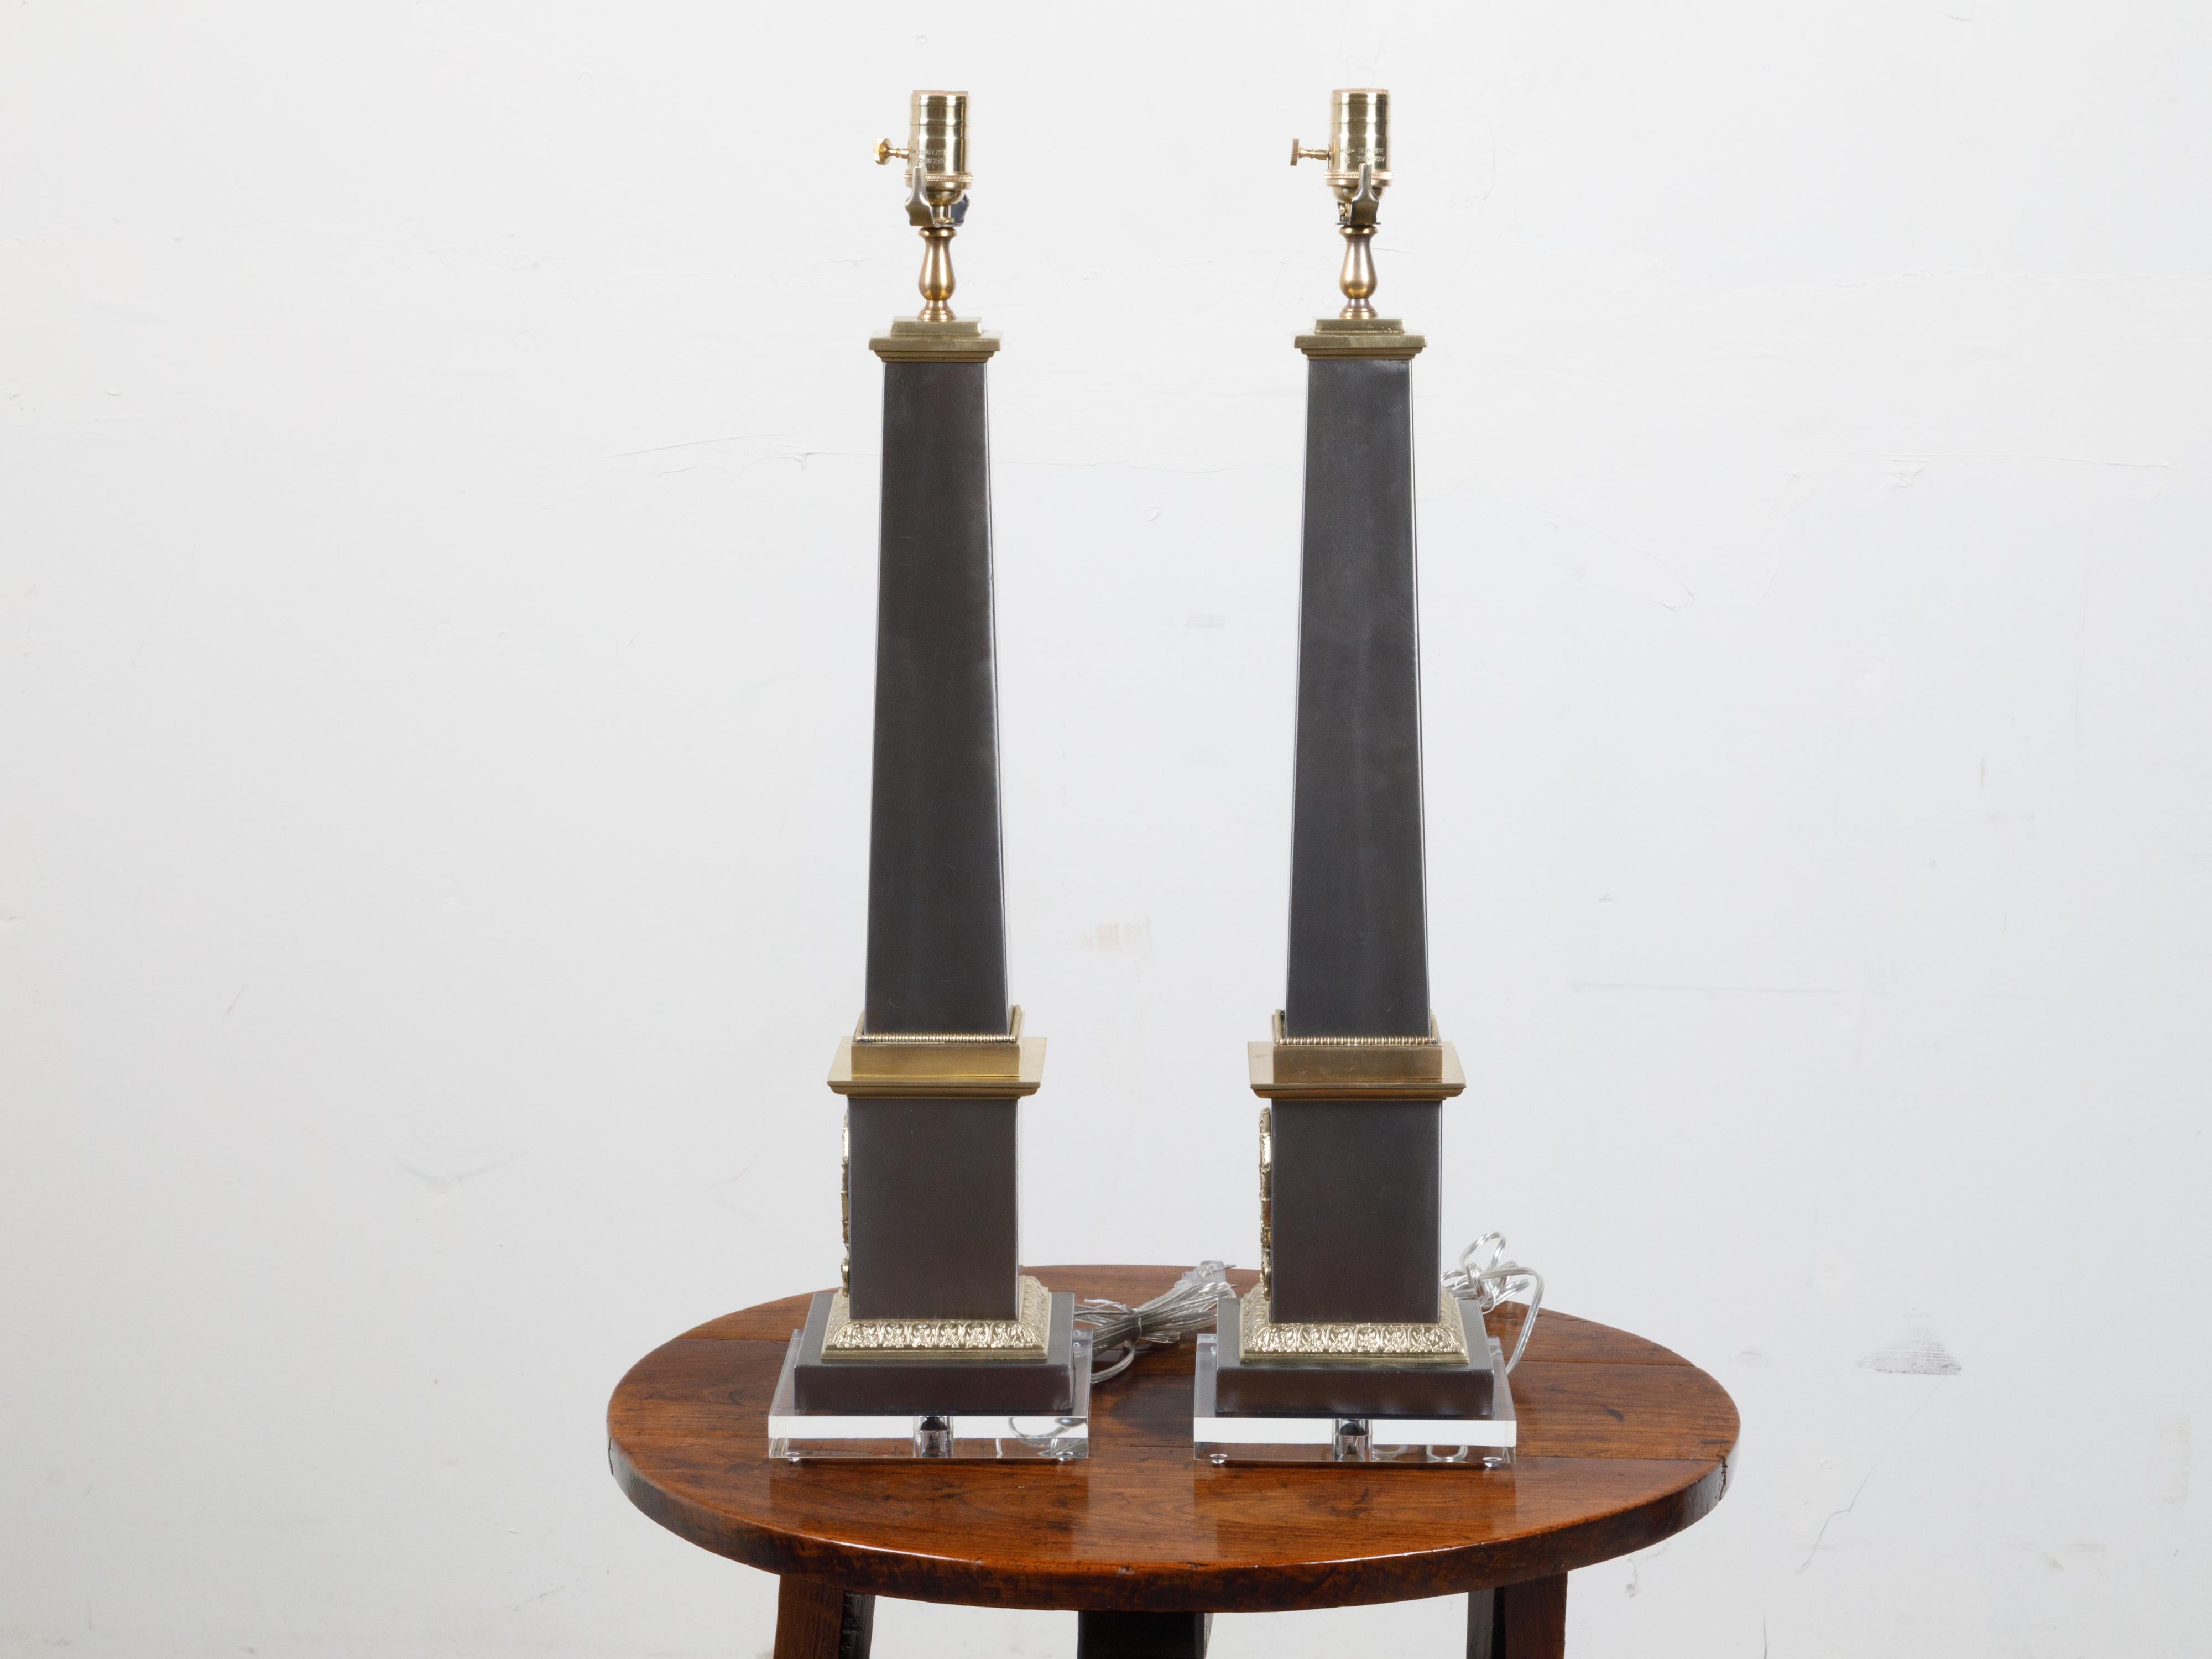 Pair of French Midcentury Steel and Brass Truncated Obelisk Table Lamps For Sale 4